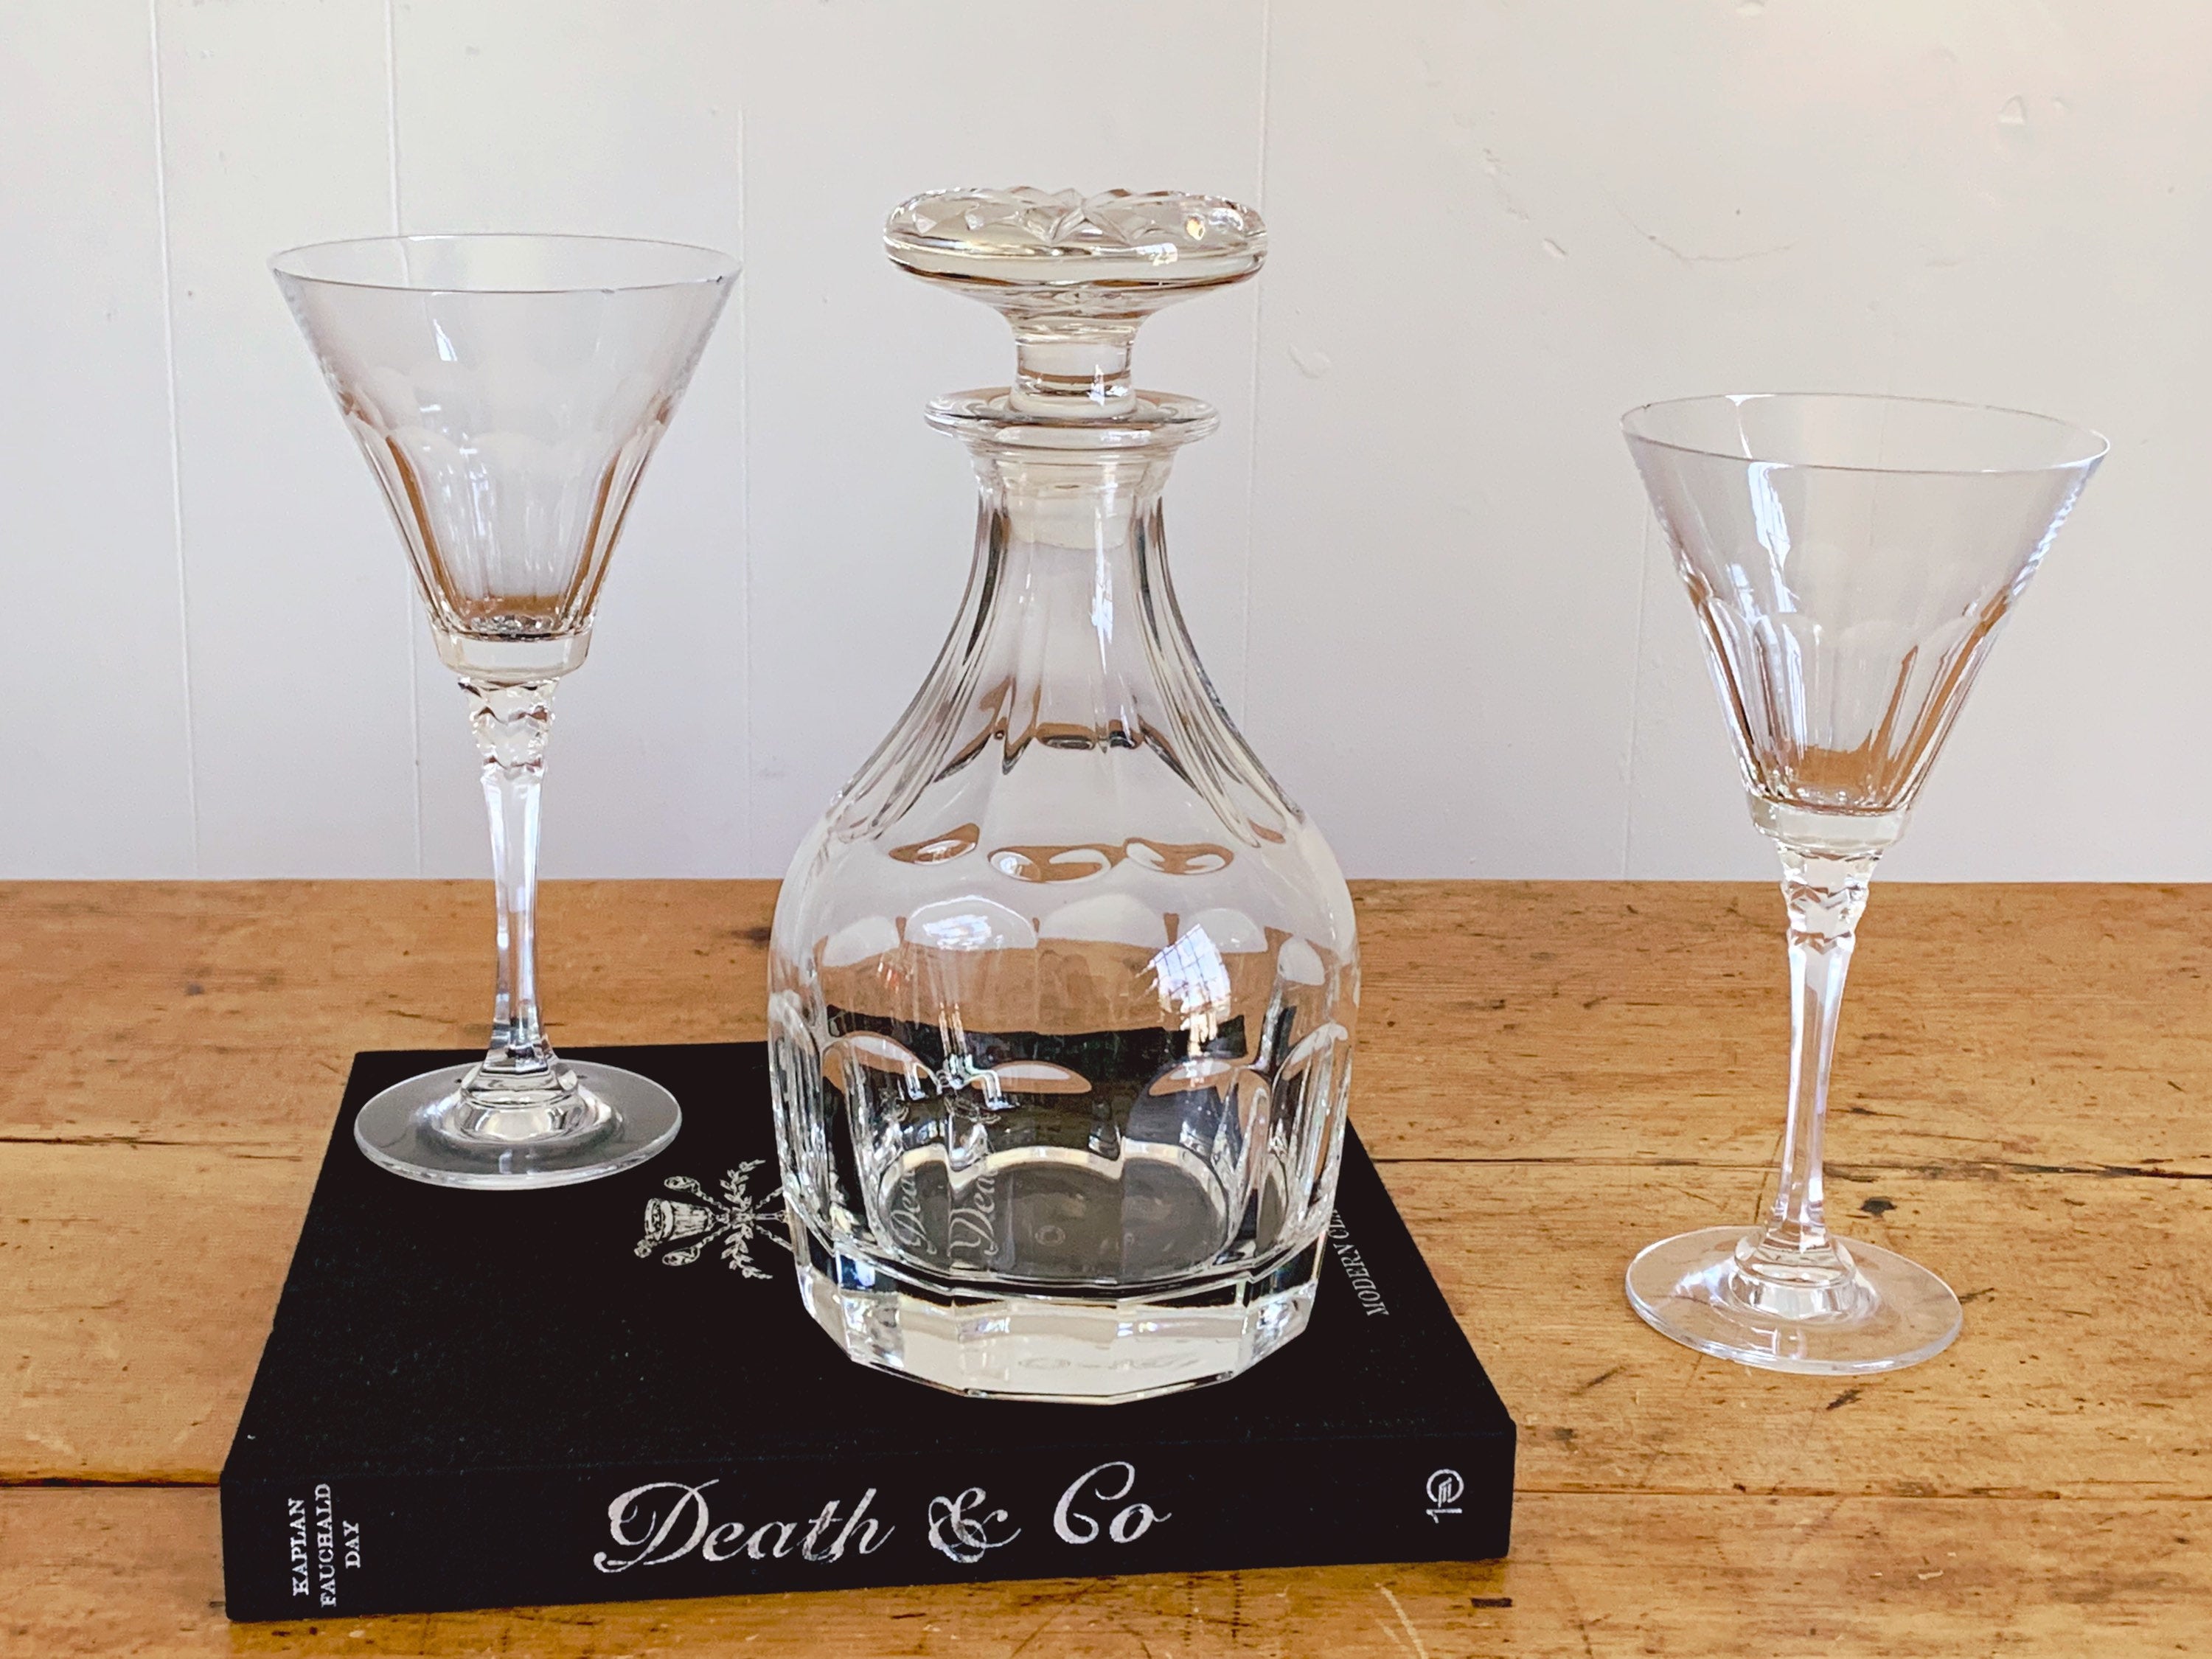 Vintage Brilliant Hand Blown and Cut Crystal Glass Decanter | Antique Barware Bar Cart Decor | Gift for Him Father's Day Gift